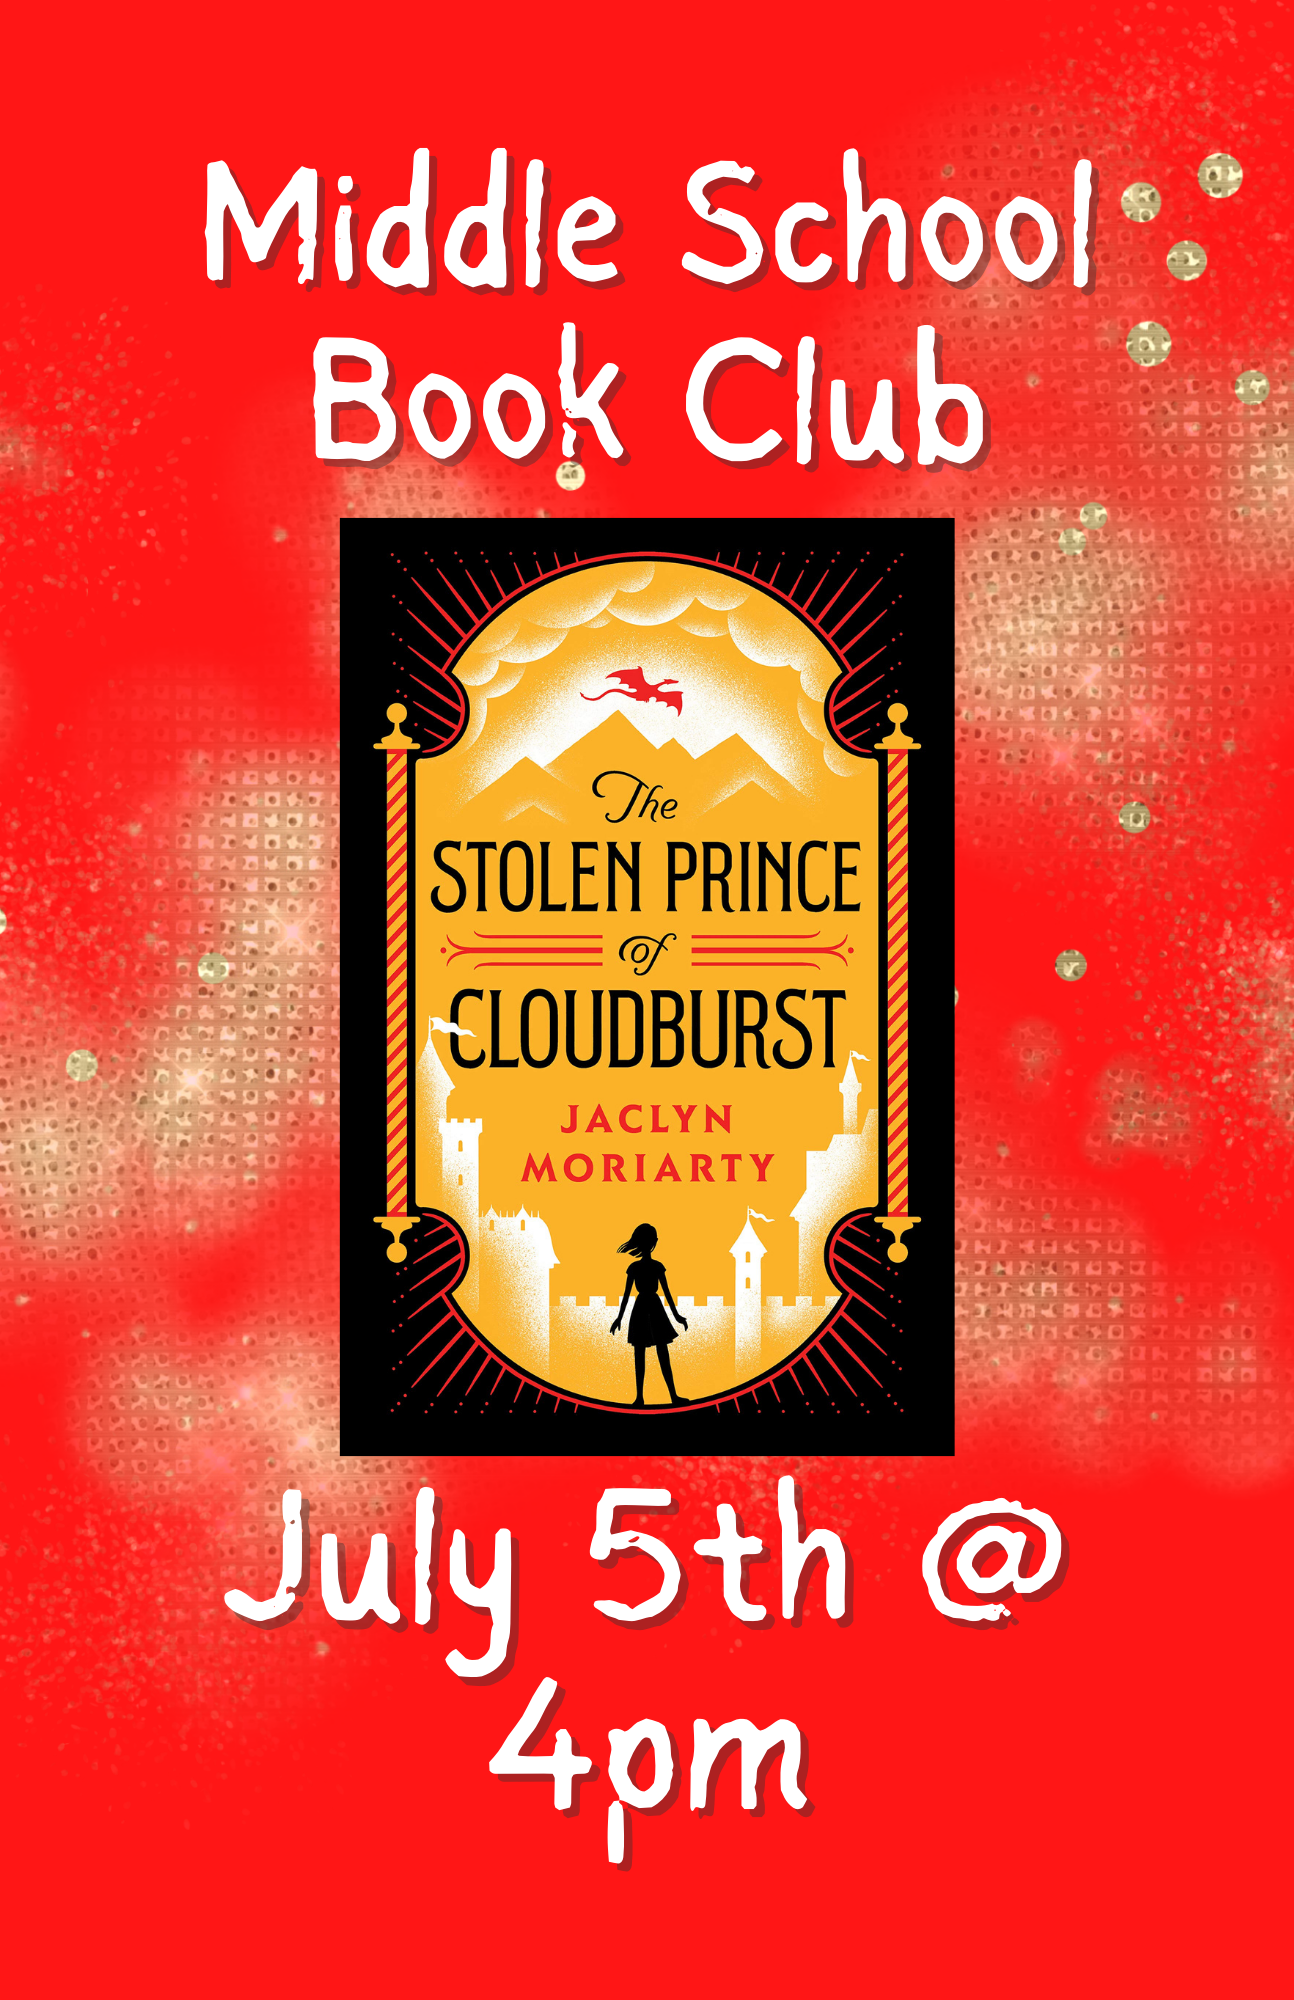 Decorative image including book cover for Stolen Prince of Cloudburst